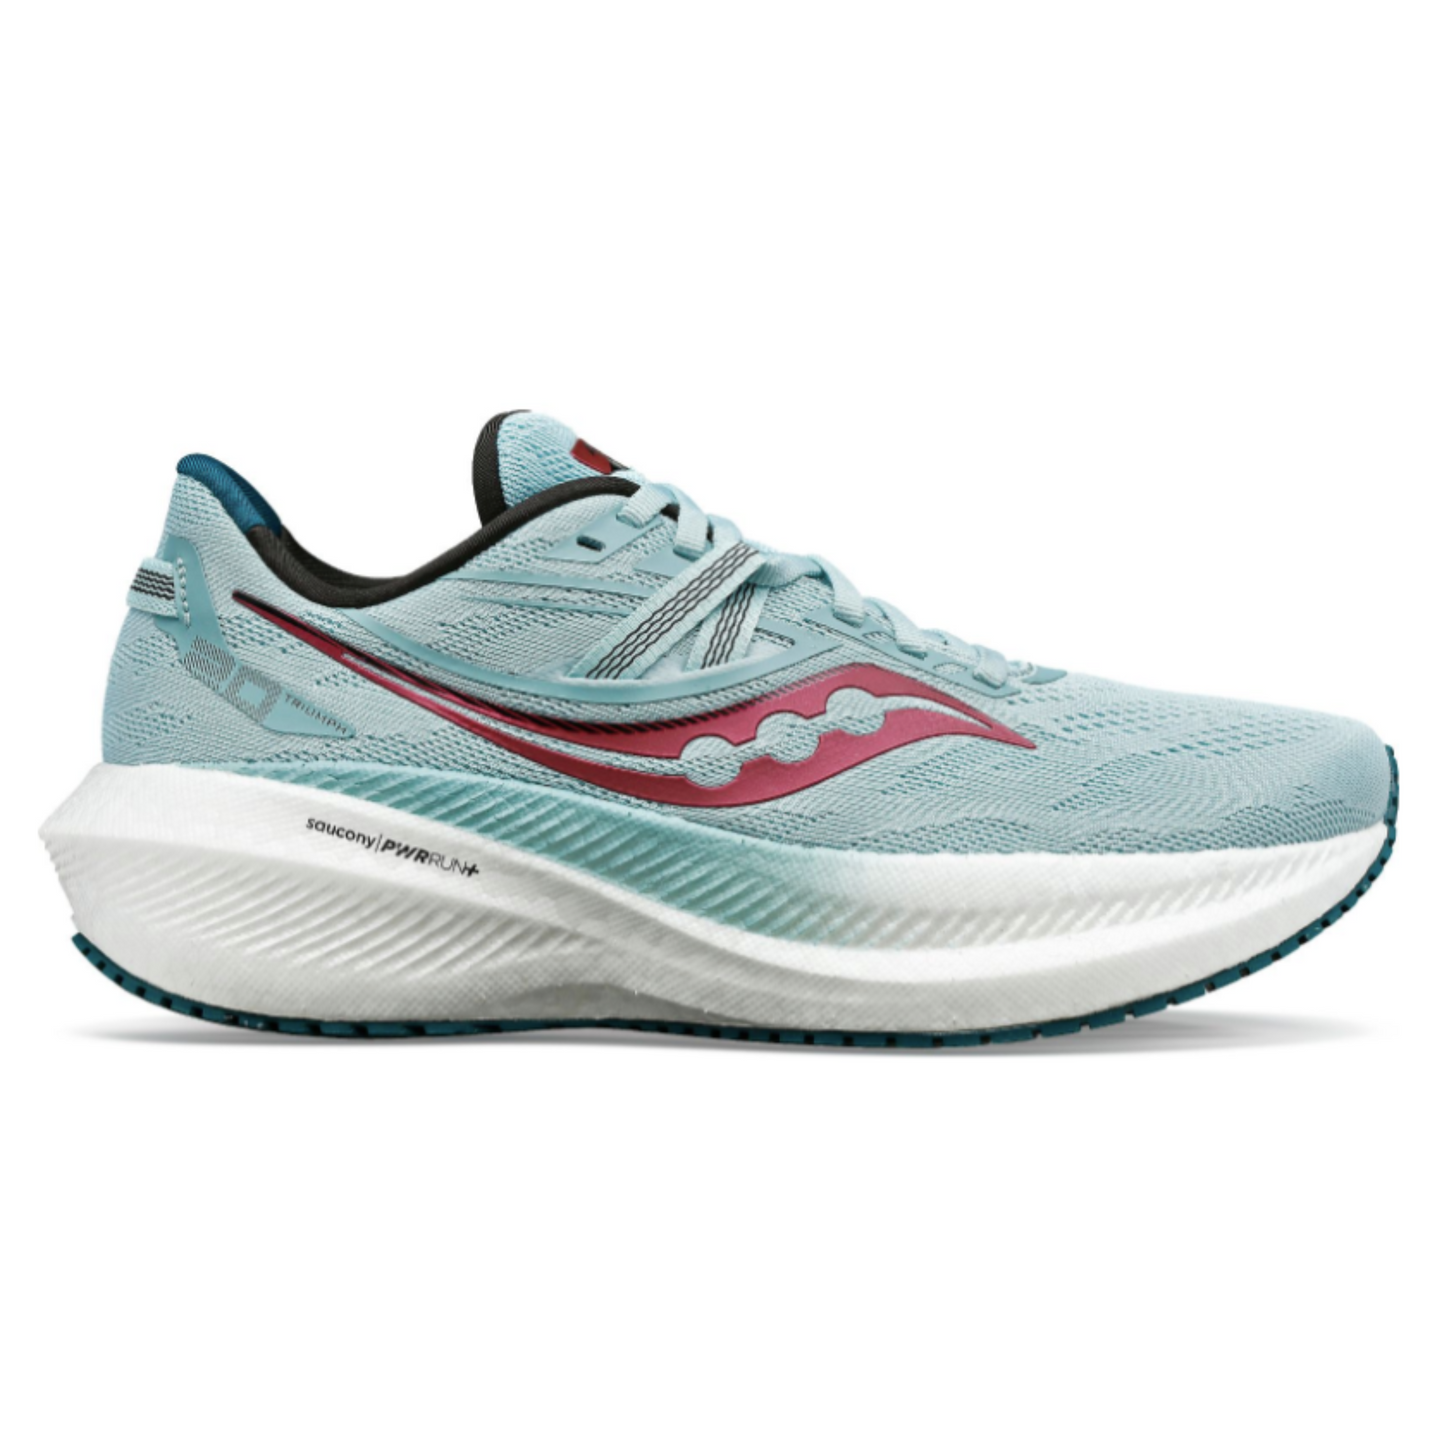 Saucony Women's Triumph in Mineral and Berry